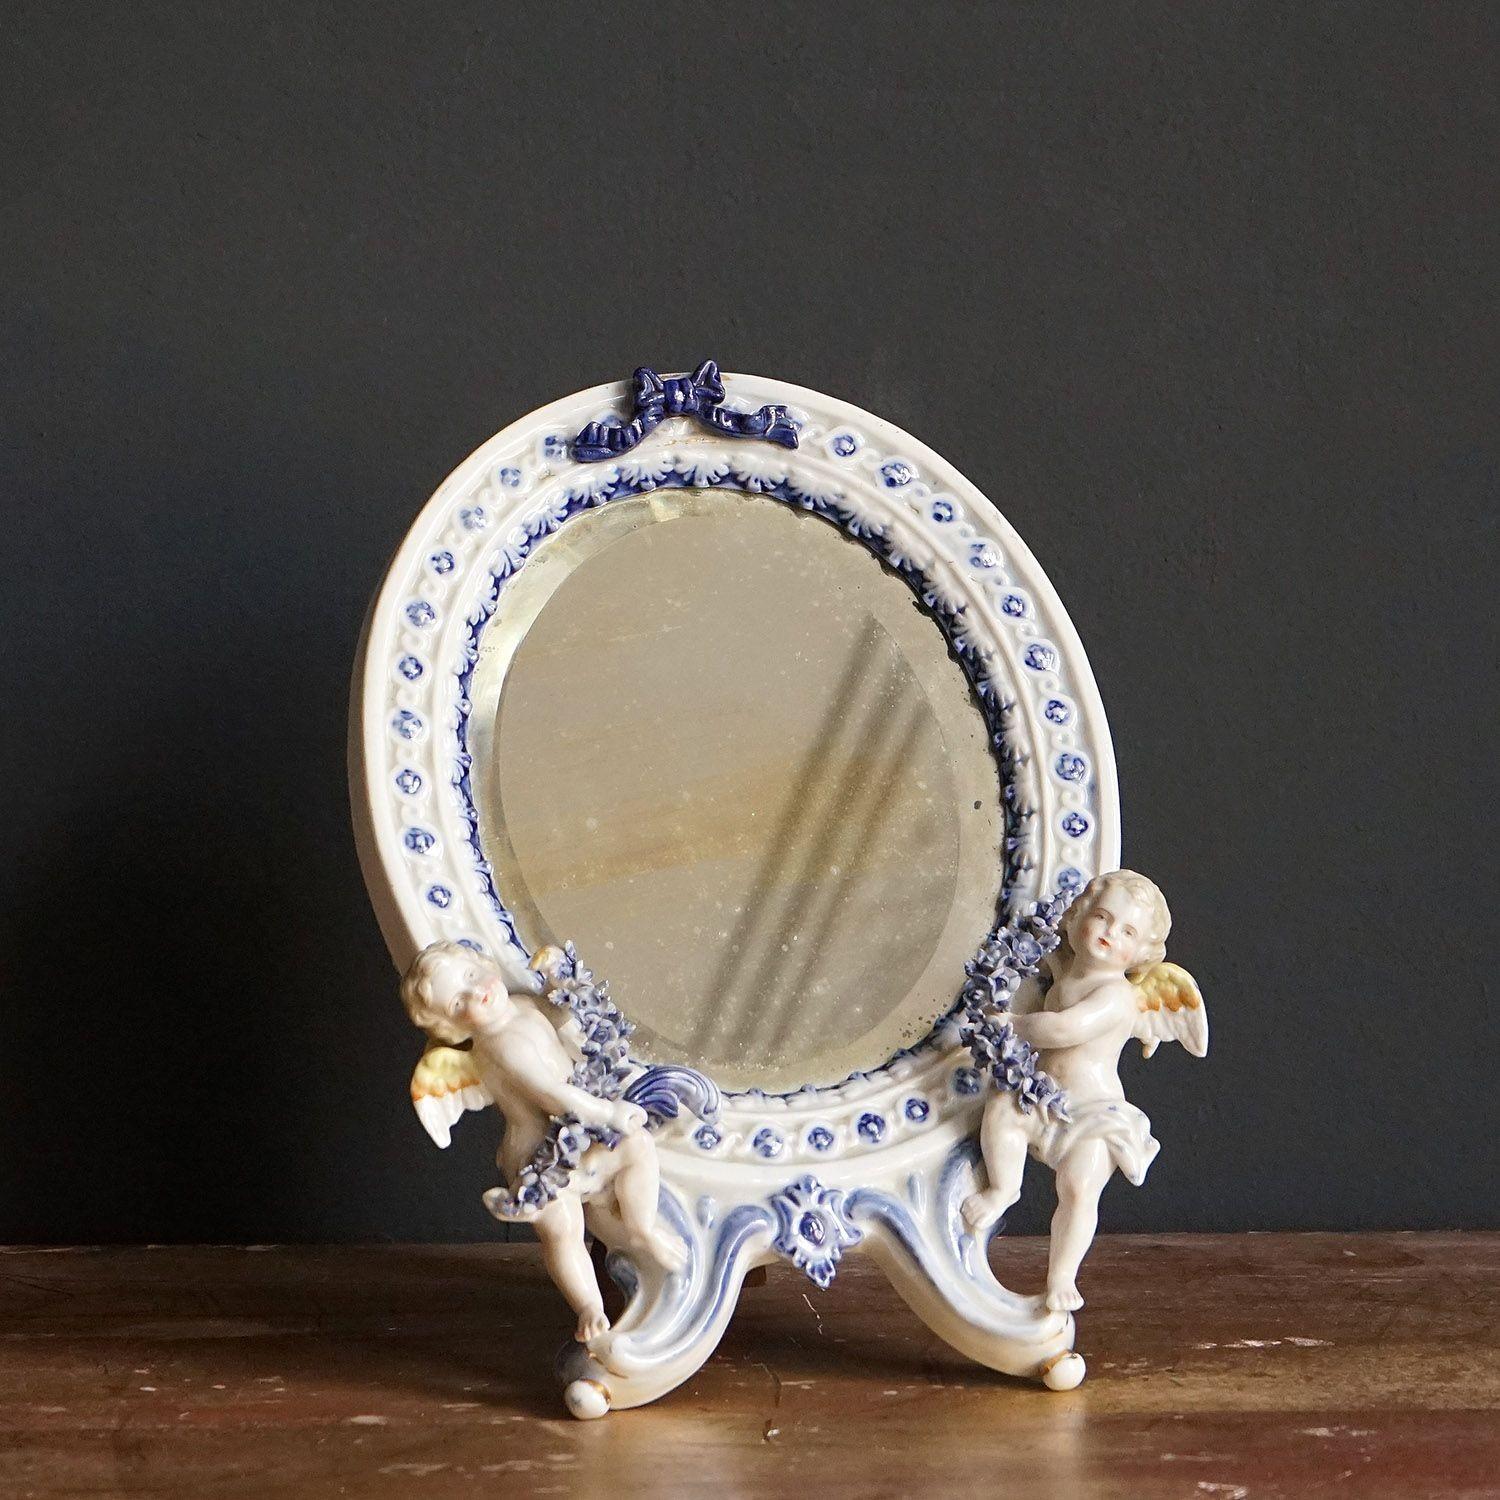 Antique German Porcelain Table Mirror With Cherubs, 19th Century In Good Condition For Sale In Bristol, GB